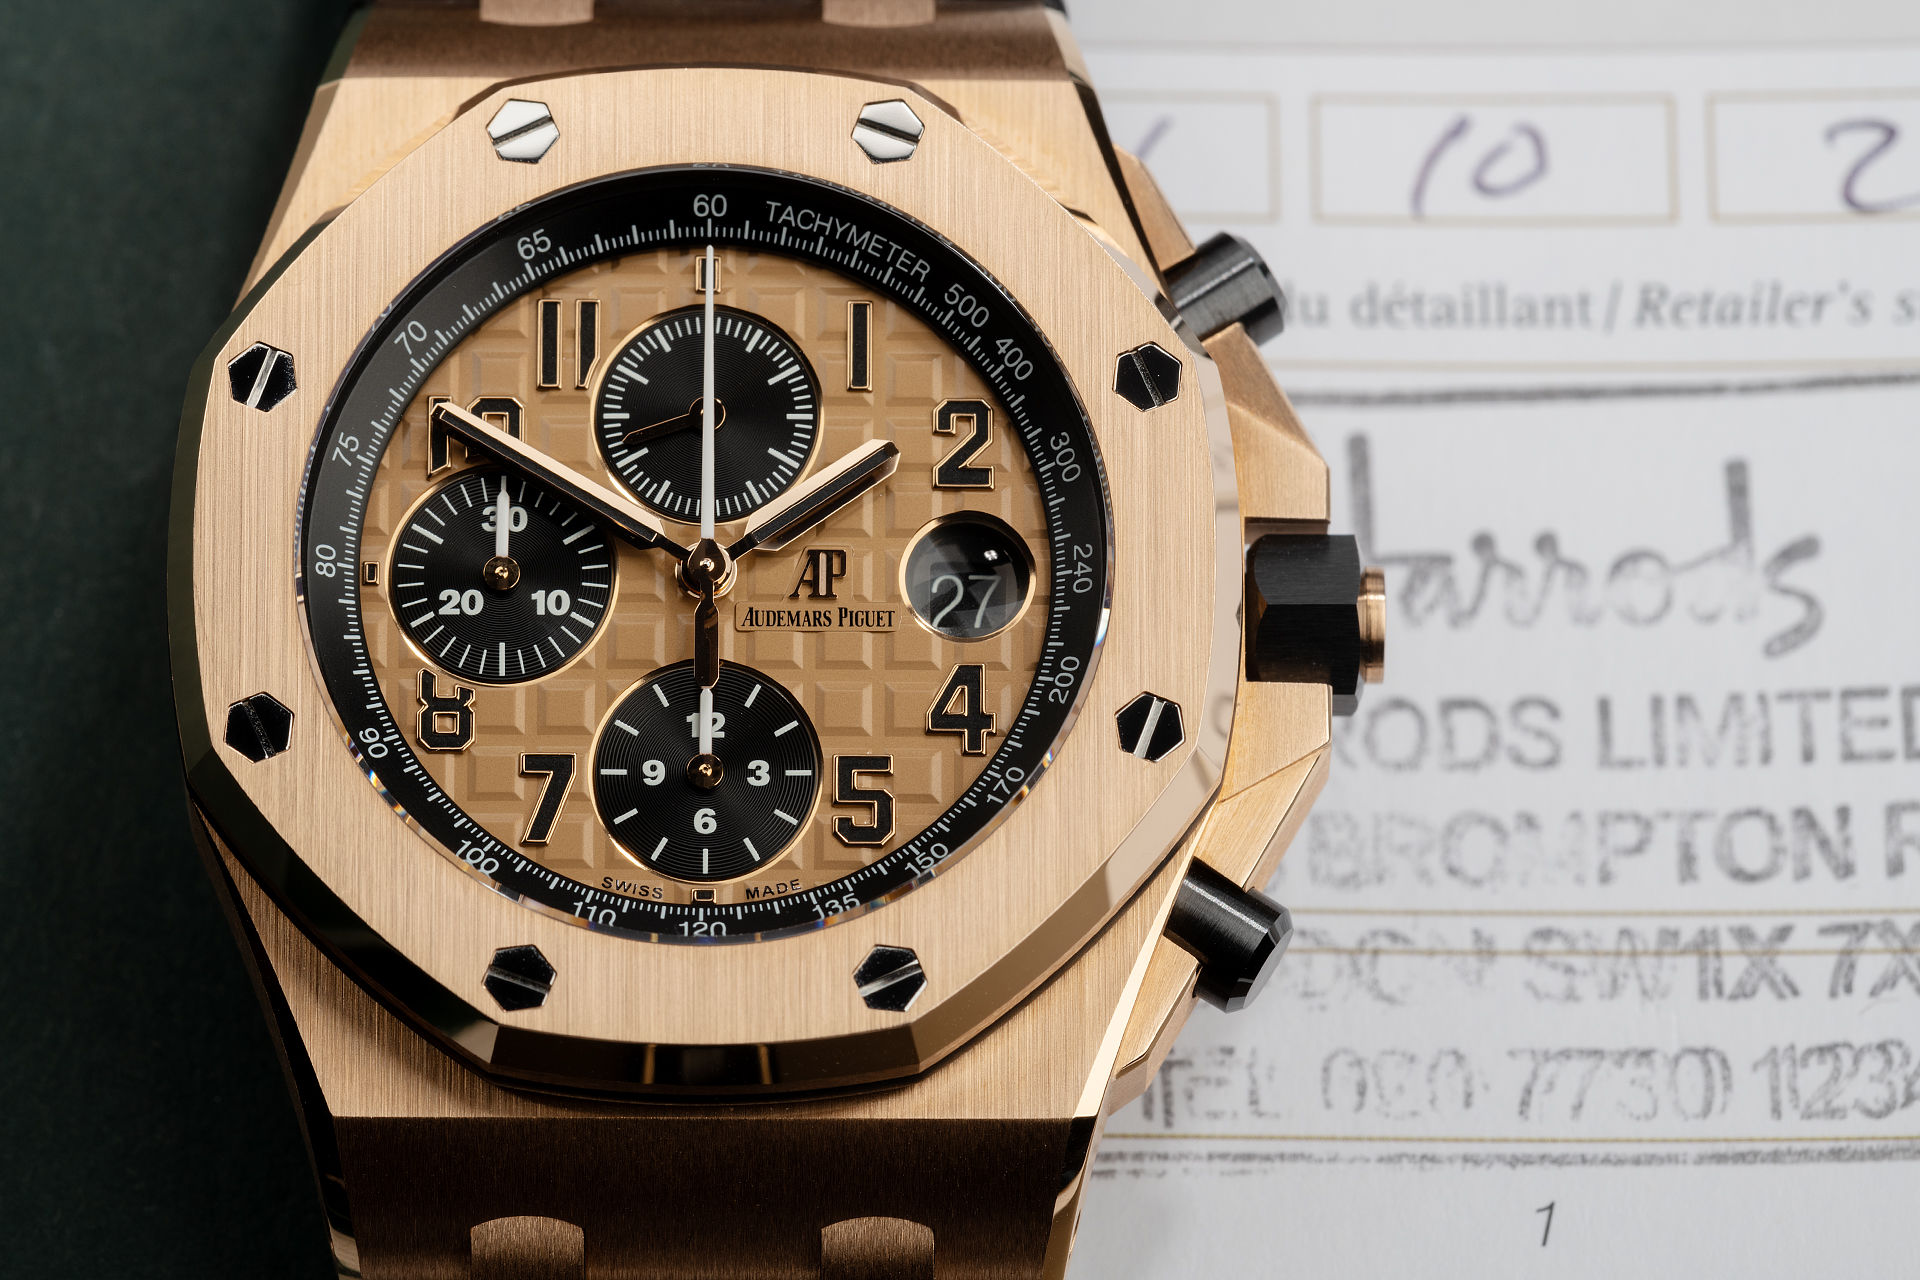 ref 26470OR.OO.A002CR.01 | New Condition 'Rose Gold'  | Audemars Piguet Royal Oak Offshore